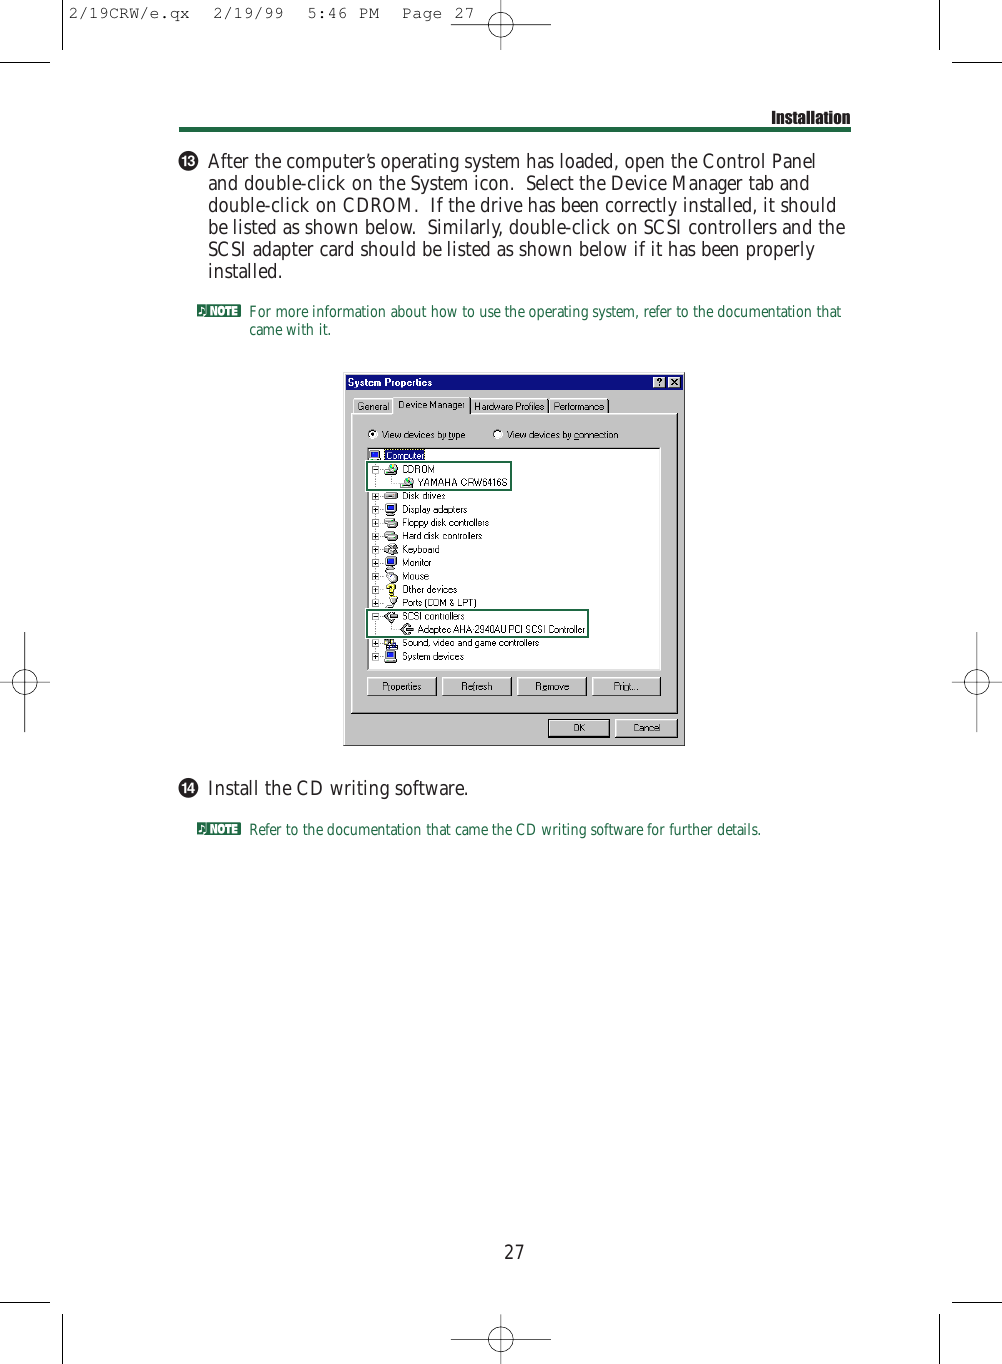 #After the computer’s operating system has loaded, open the Control Paneland double-click on the System icon.  Select the Device Manager tab anddouble-click on CDROM.  If the drive has been correctly installed, it shouldbe listed as shown below.  Similarly, double-click on SCSI controllers and theSCSI adapter card should be listed as shown below if it has been properlyinstalled.nFor more information about how to use the operating system, refer to the documentation thatcame with it.$Install the CD writing software.nRefer to the documentation that came the CD writing software for further details.27Installation2/19CRW/e.qx  2/19/99  5:46 PM  Page 27